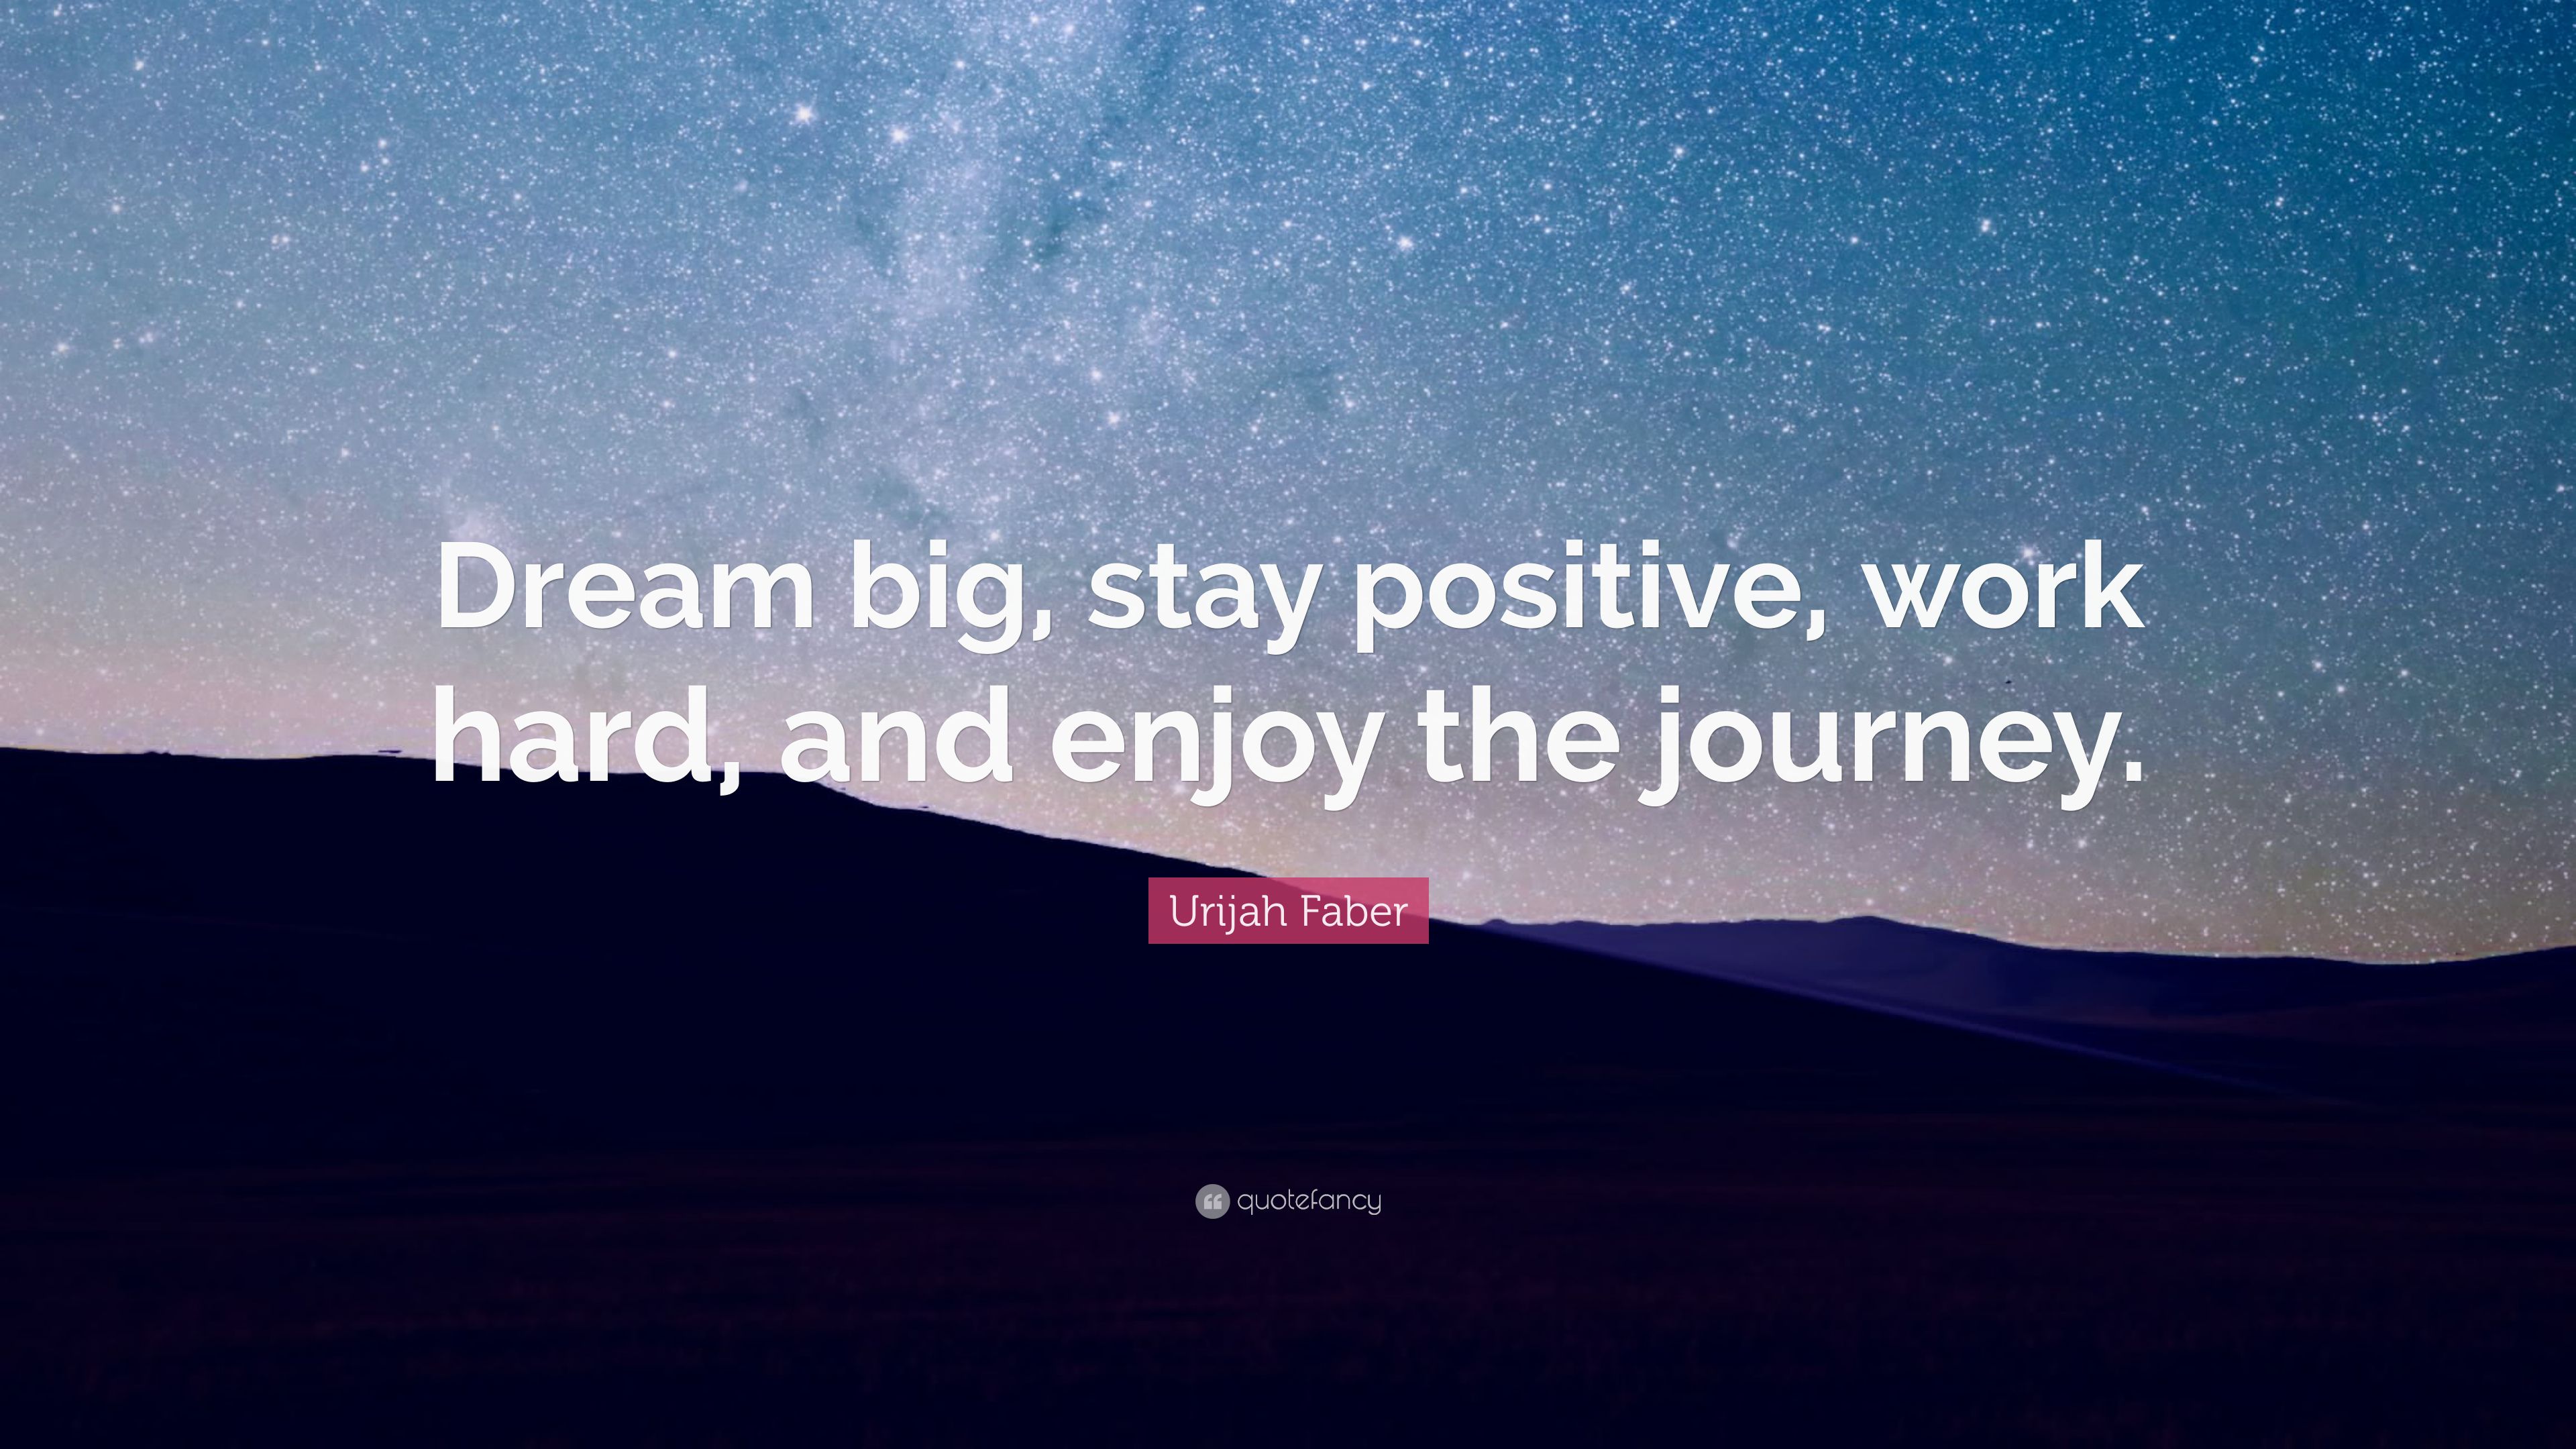 Urijah Faber Quote: “Dream big, stay positive, work hard, and enjoy the journey.” (28 wallpaper)